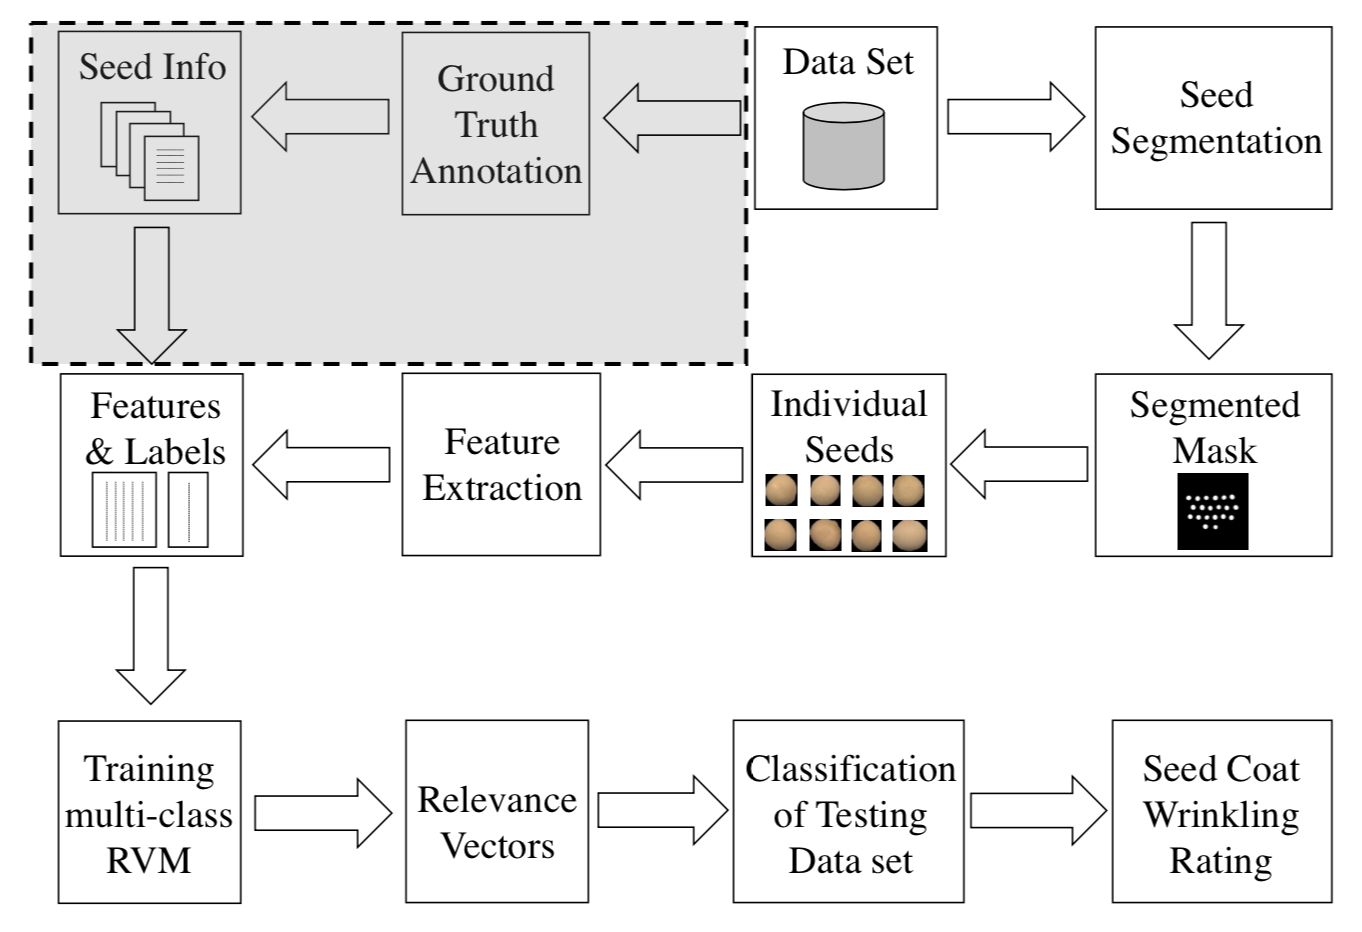 Automated Classification of Wrinkle Levels in Seed Coat Using Relevance Vector Machine